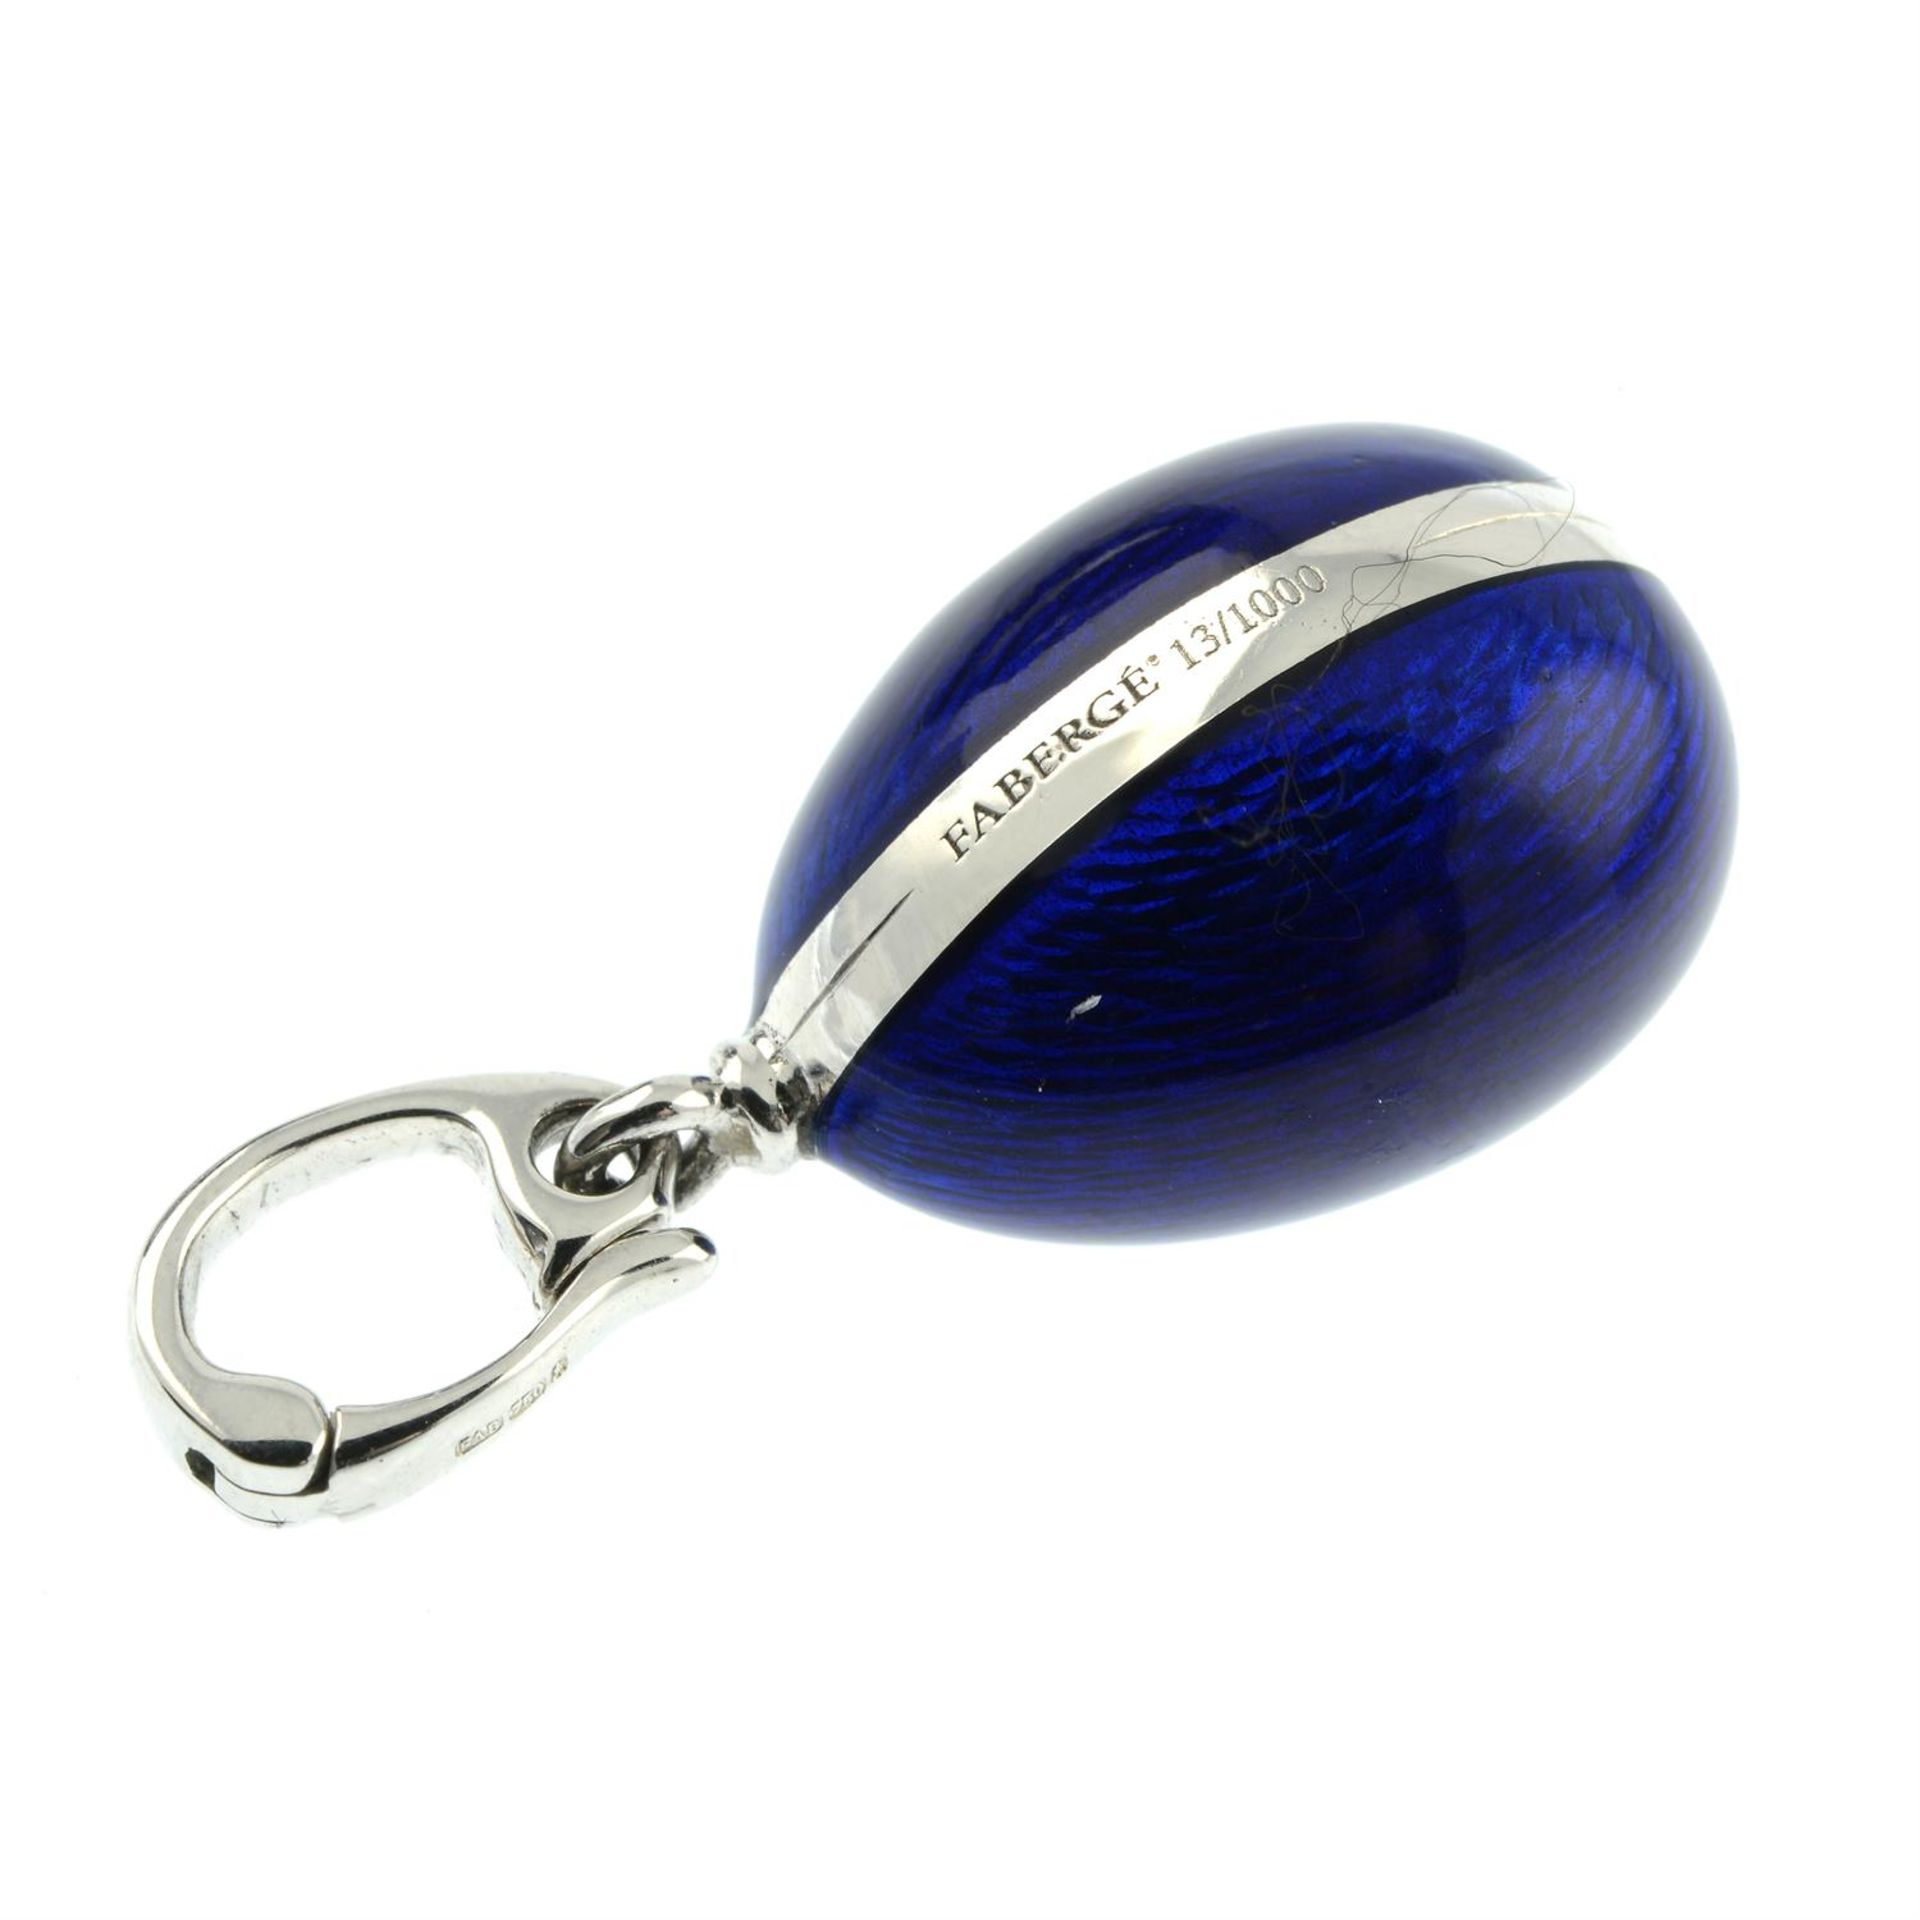 A limited edition 18ct gold blue enamel egg pendant, with diamond swan highlight, by Fabergé. - Image 4 of 5